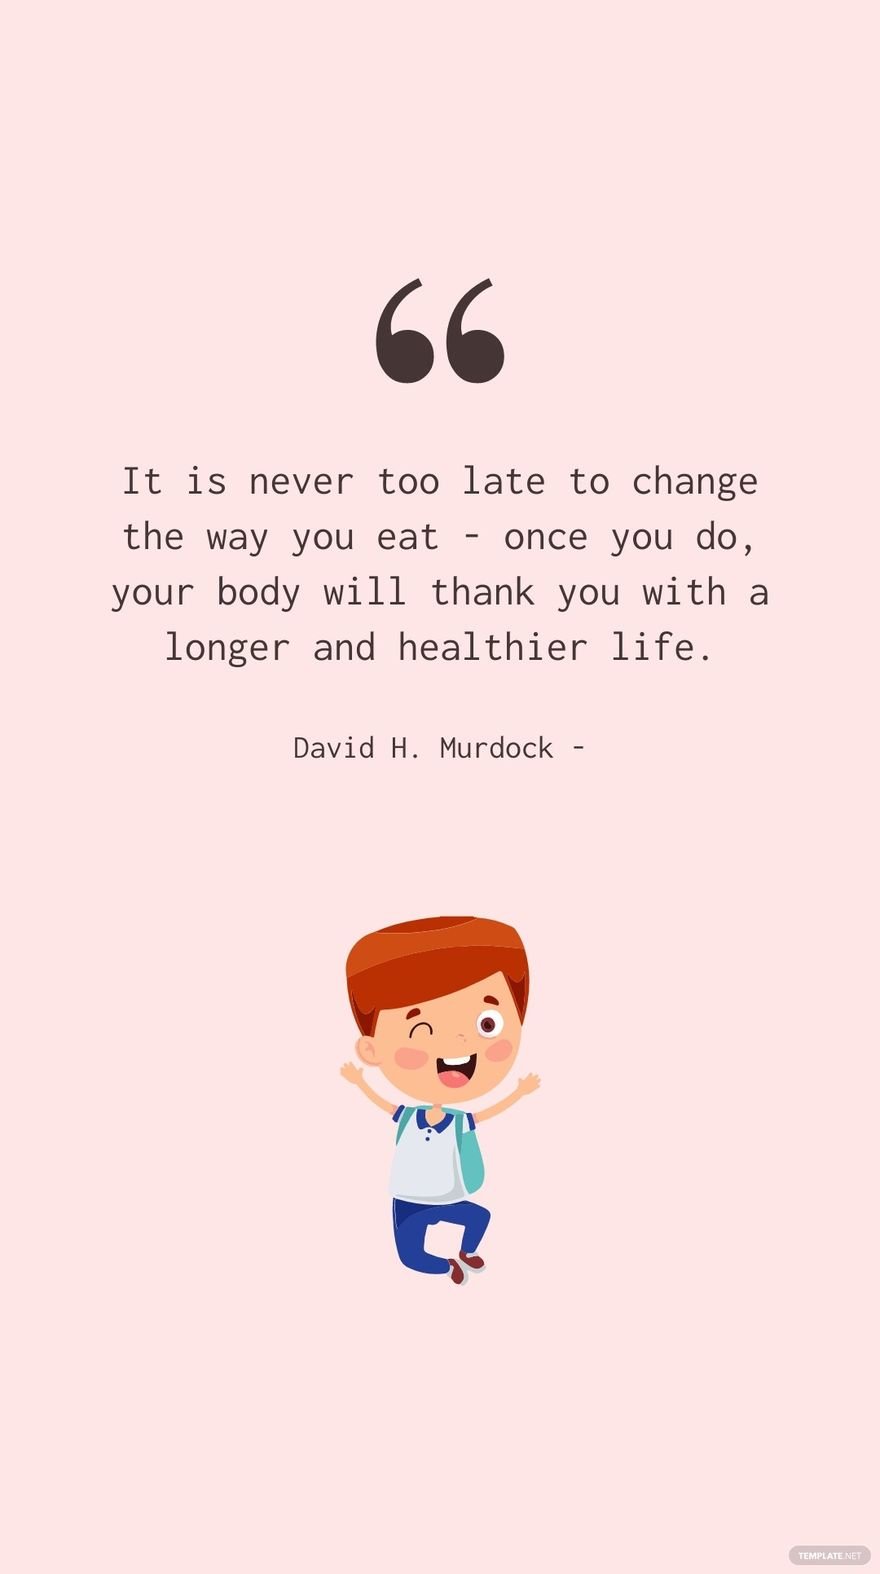 David H. Murdock - It is never too late to change the way you eat - once you do, your body will thank you with a longer and healthier life.